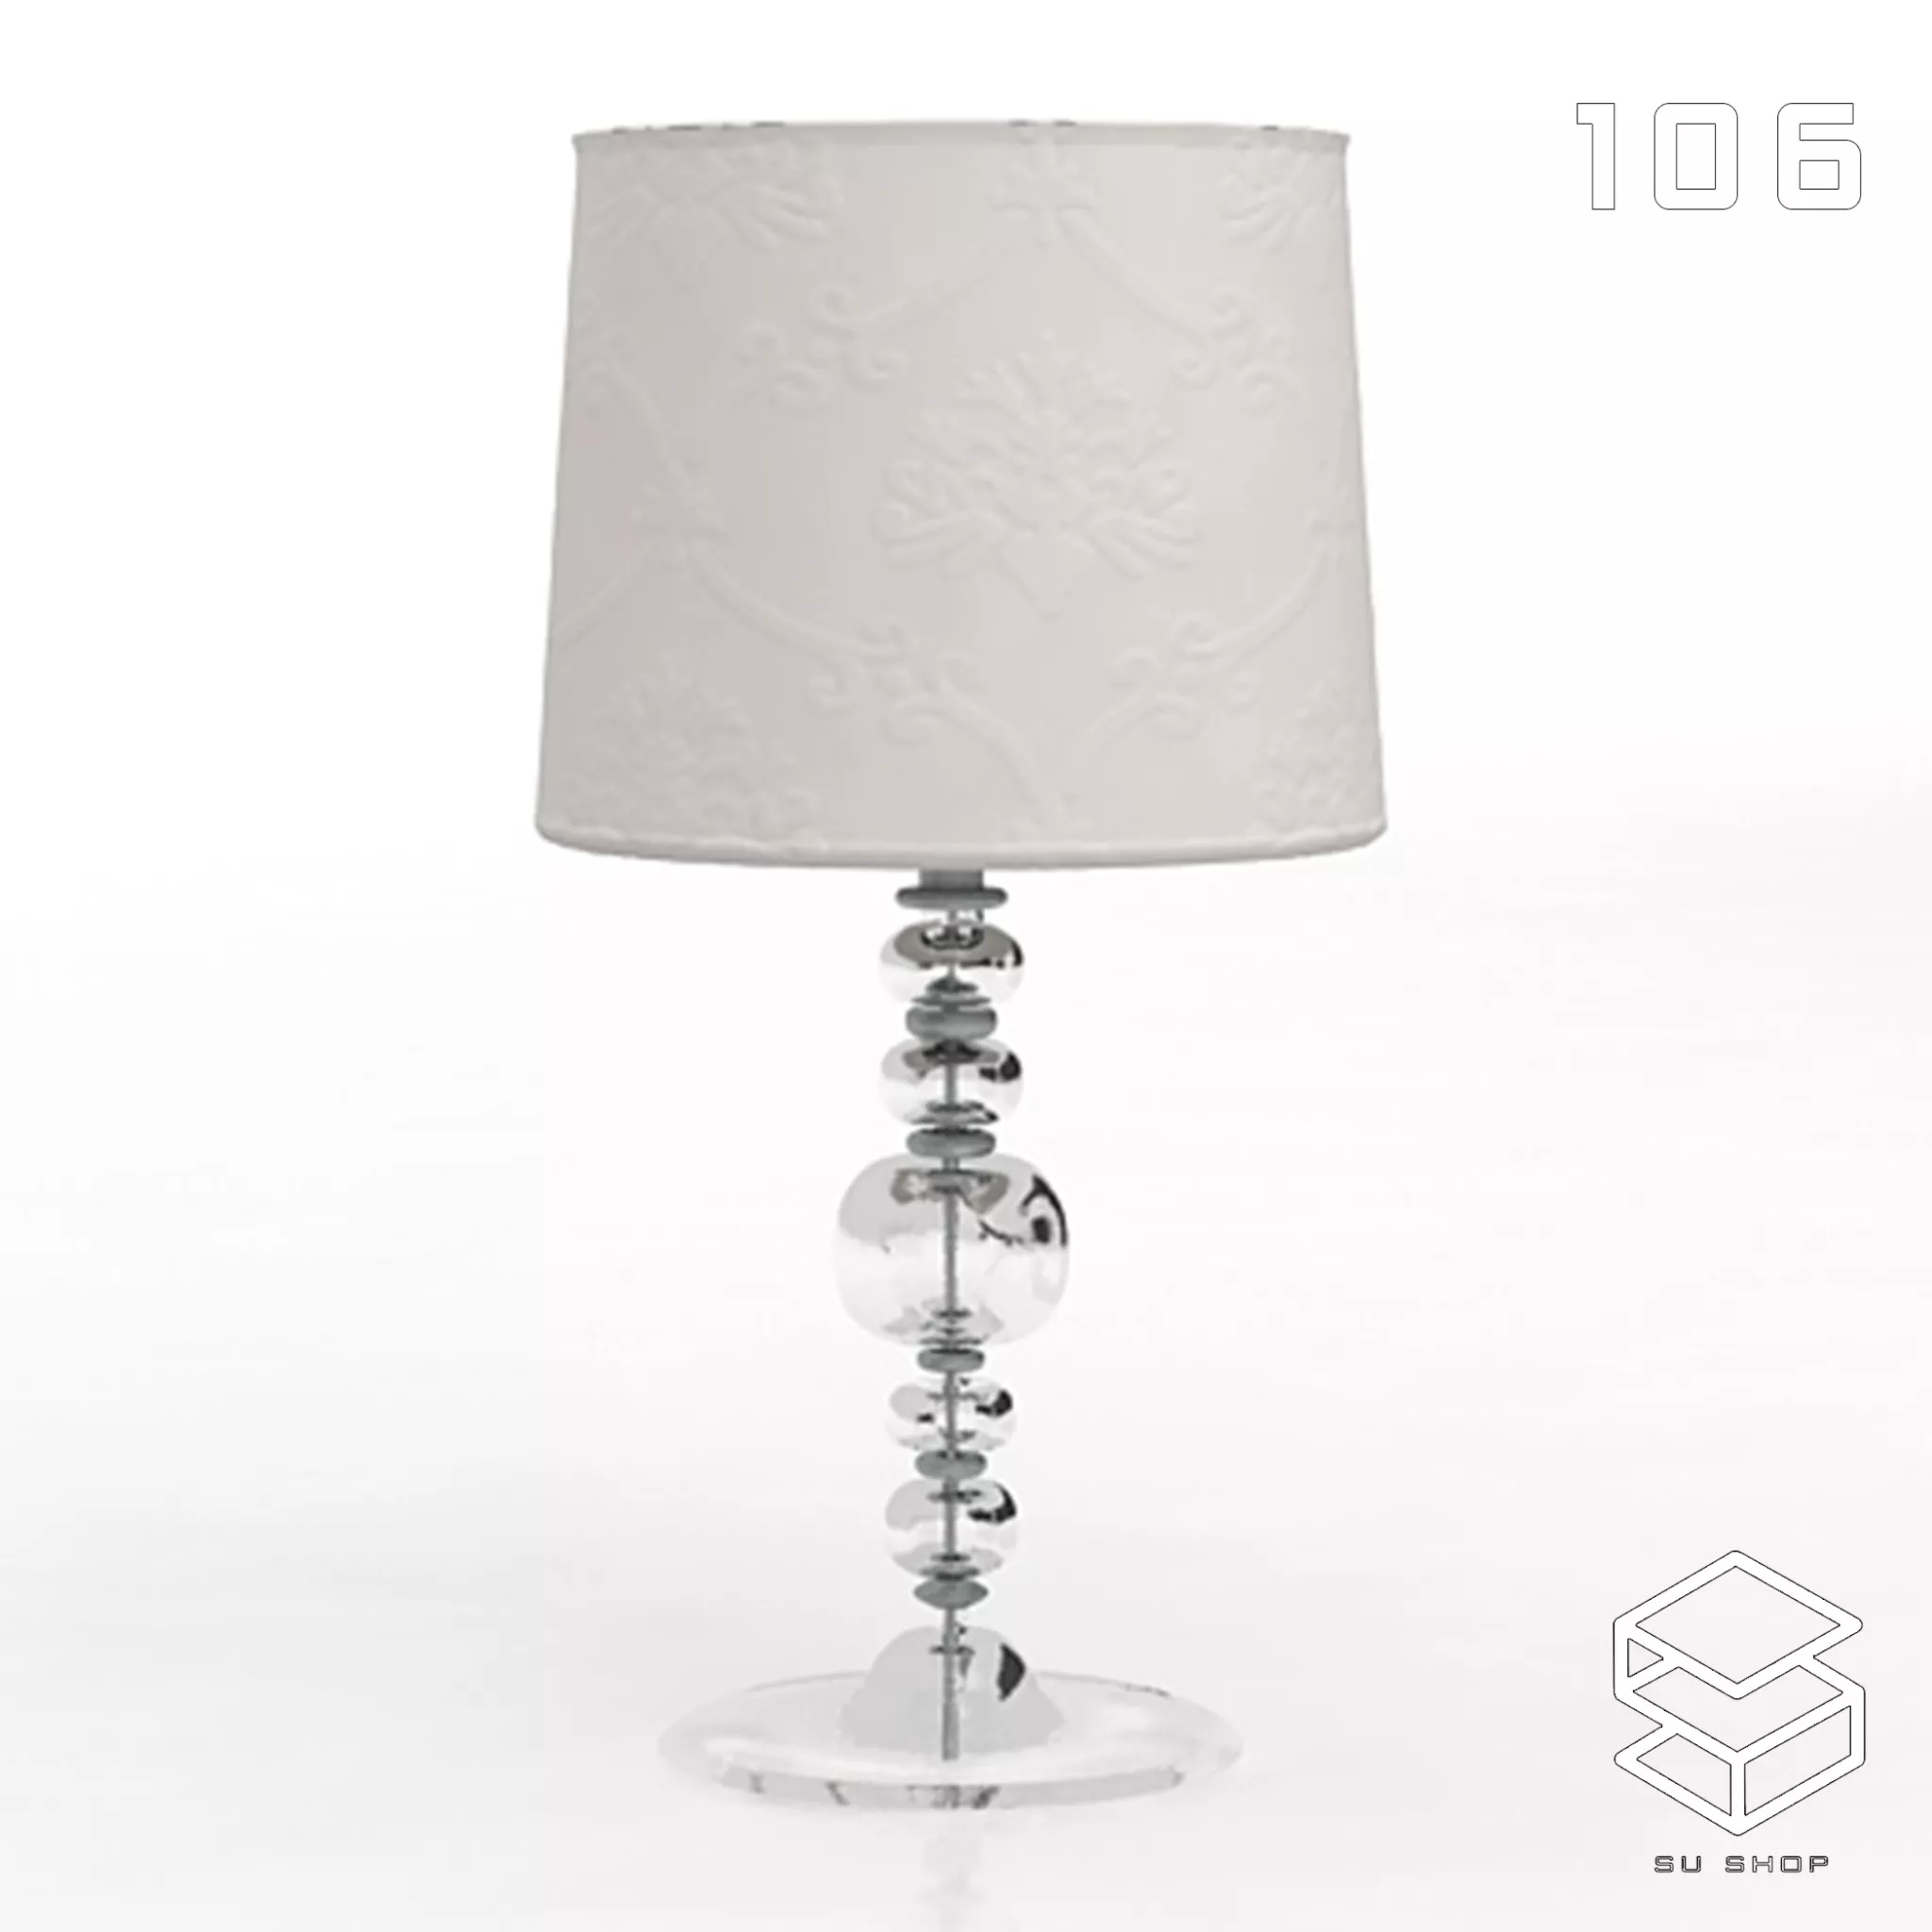 MODERN TABLE LAMP - SKETCHUP 3D MODEL - VRAY OR ENSCAPE - ID14671